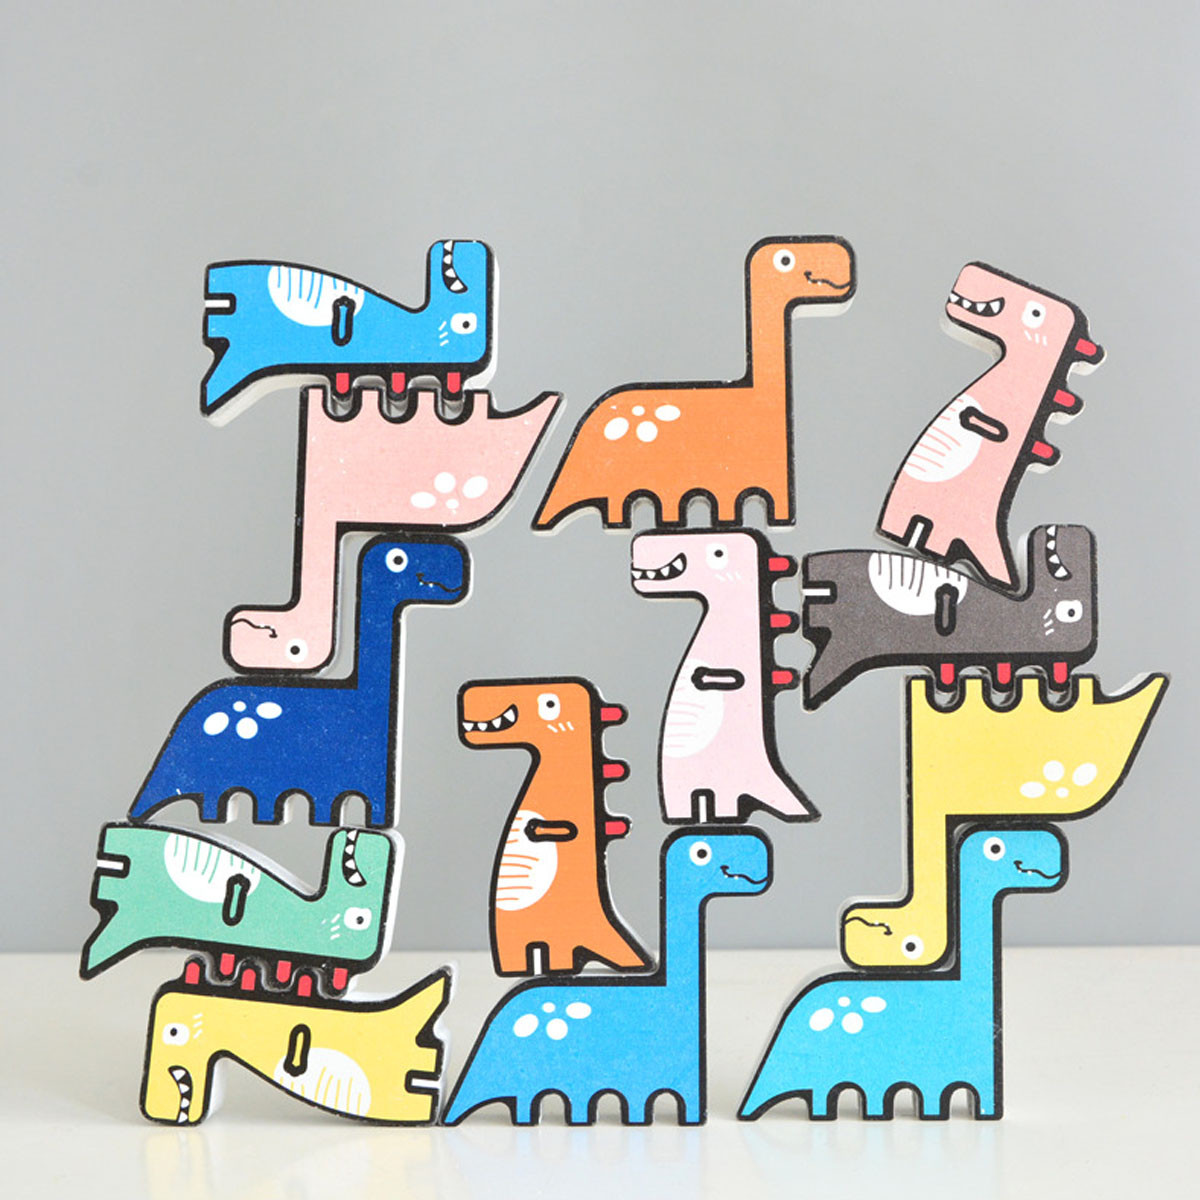 1113-Pcs-Creative-Panda-Dinosaur-Wooden-Stacking-Game-Building-Blocks-Early-Educational-Toy-for-Kids-1717485-4